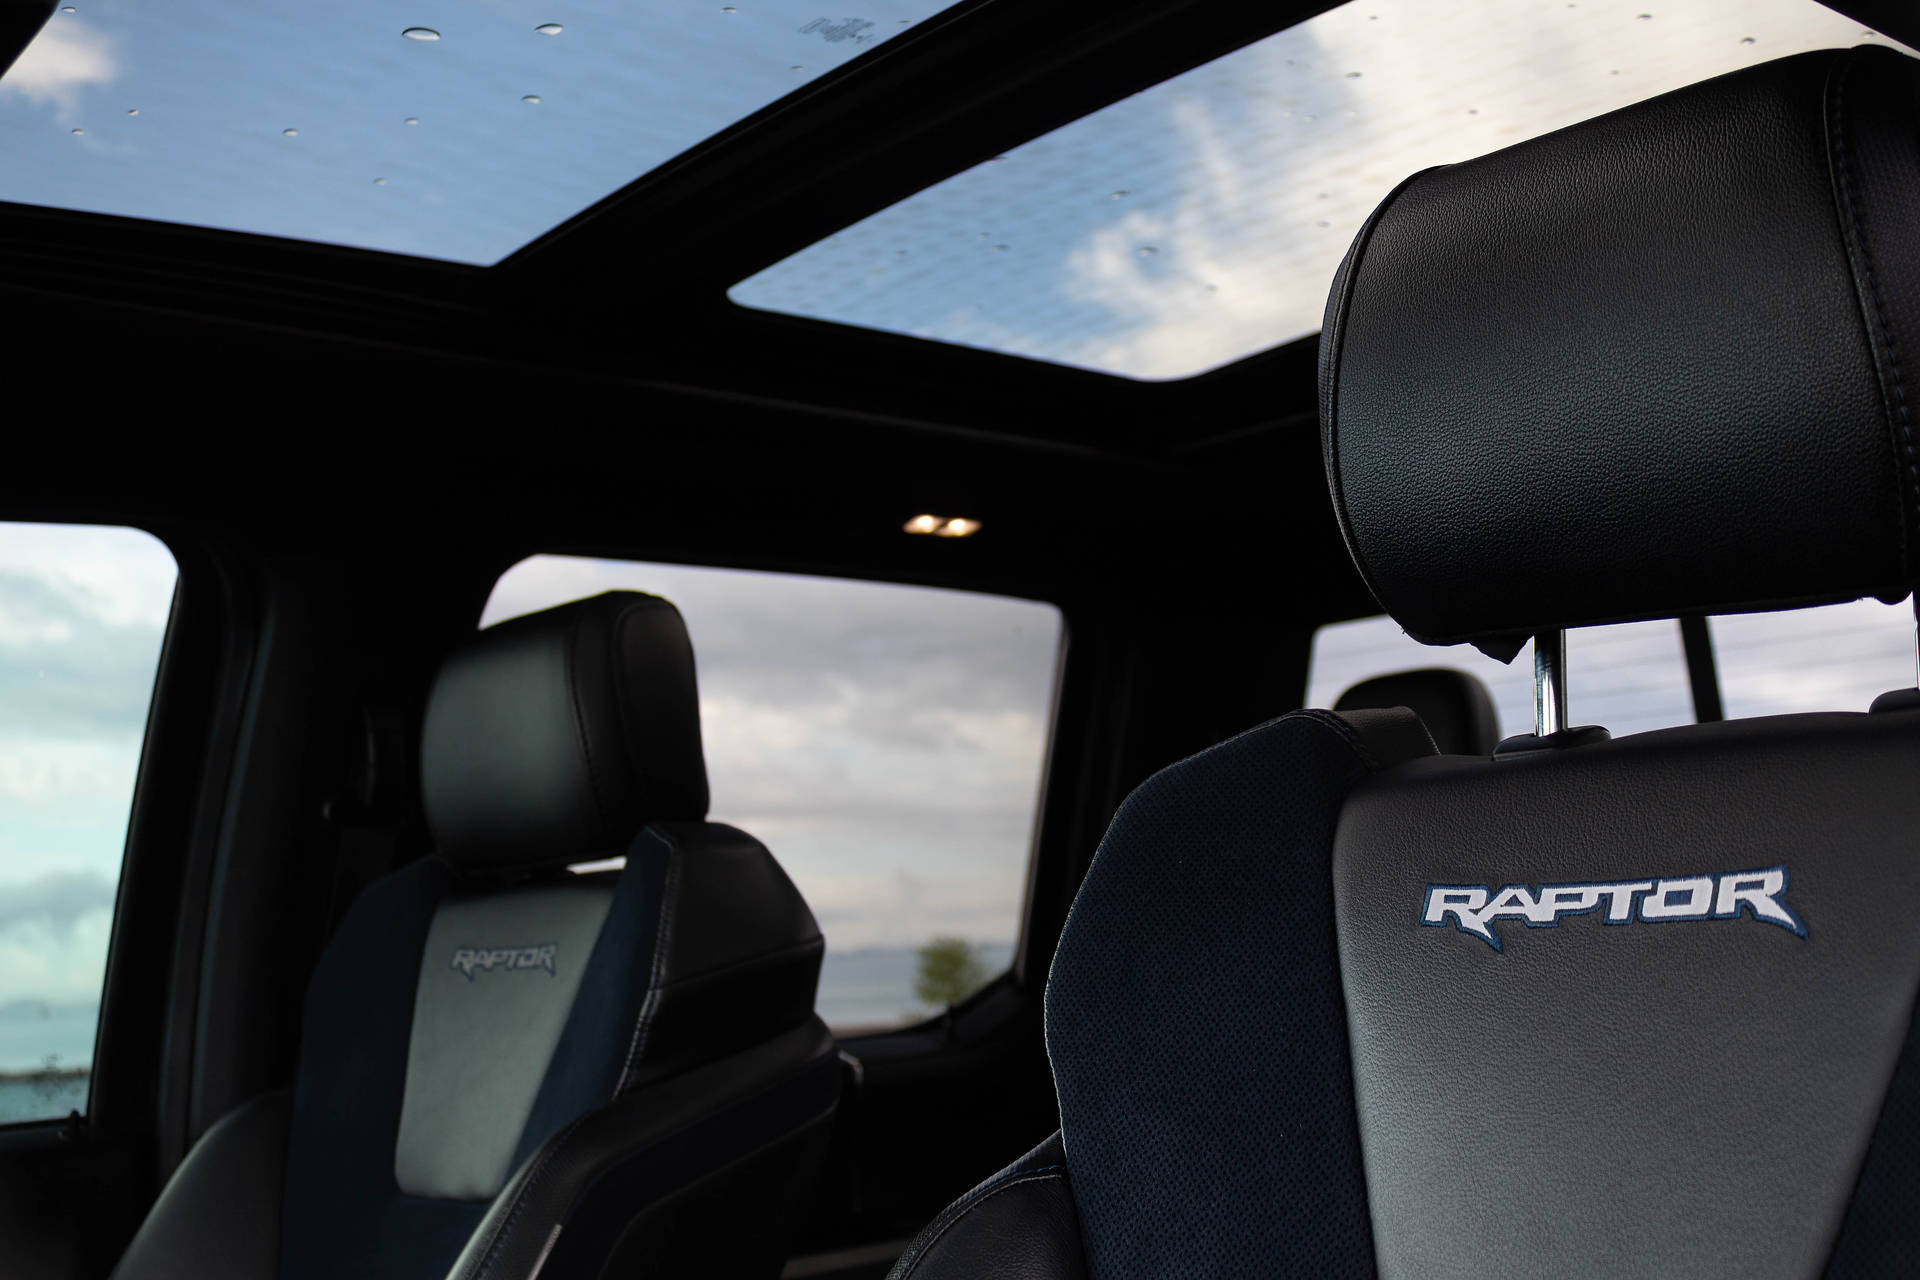 Powerful Ford Raptor With Panoramic Sunroof Wallpaper